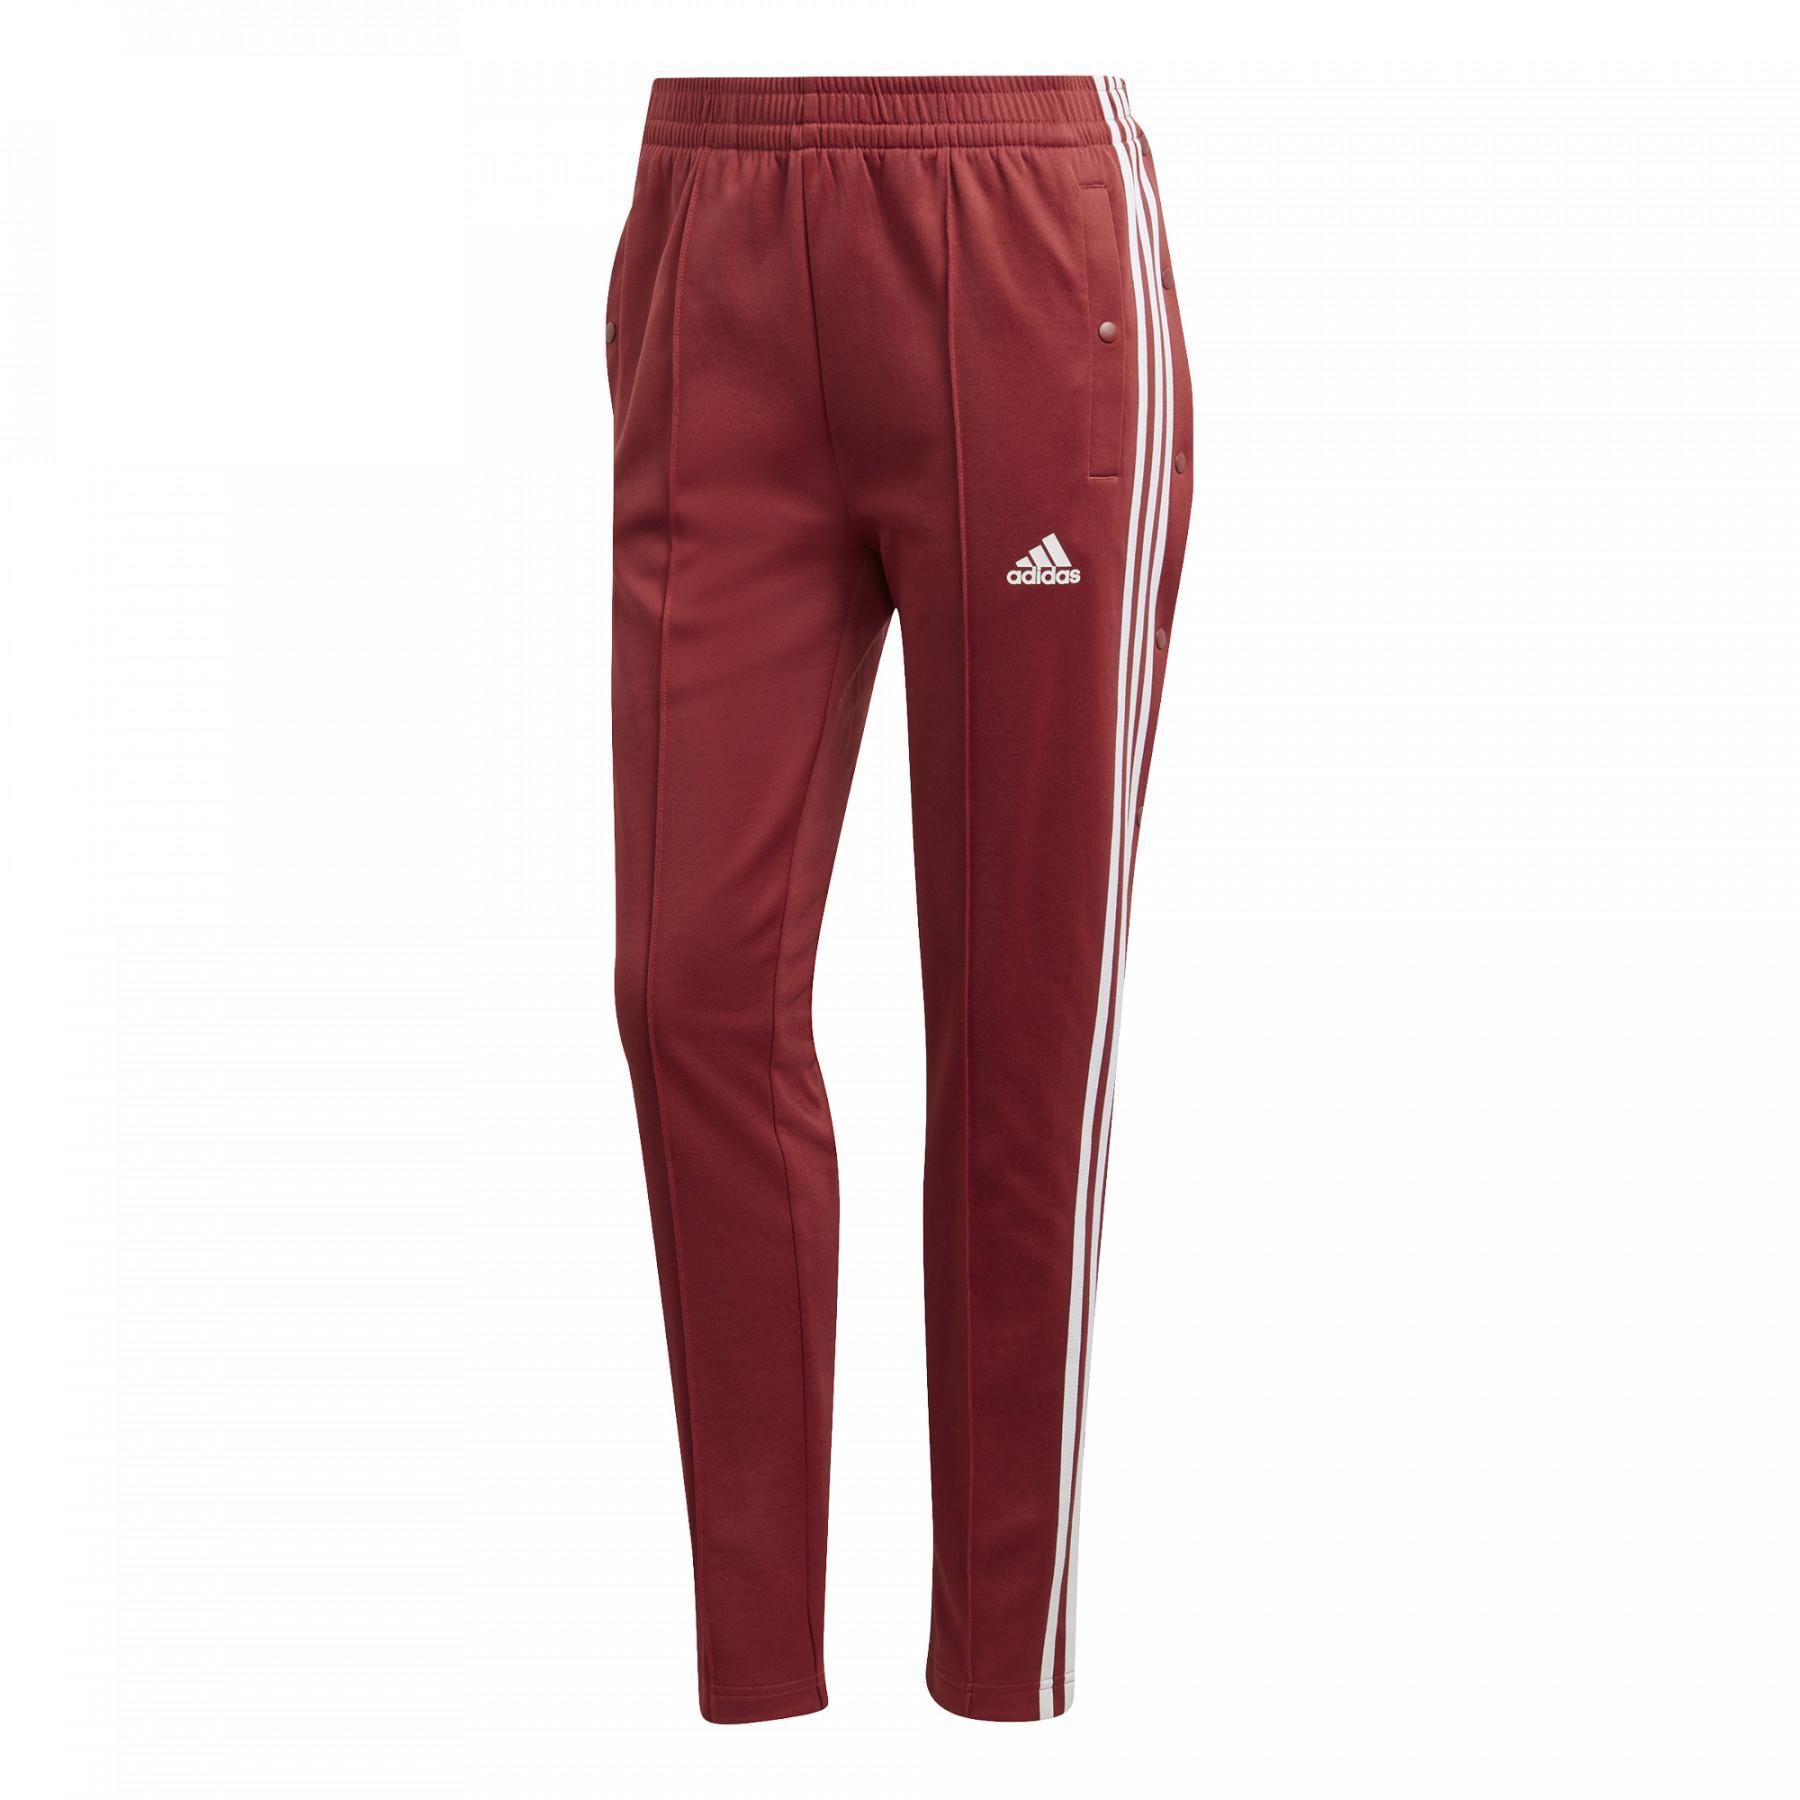 Women's trousers adidas Must Haves Snap